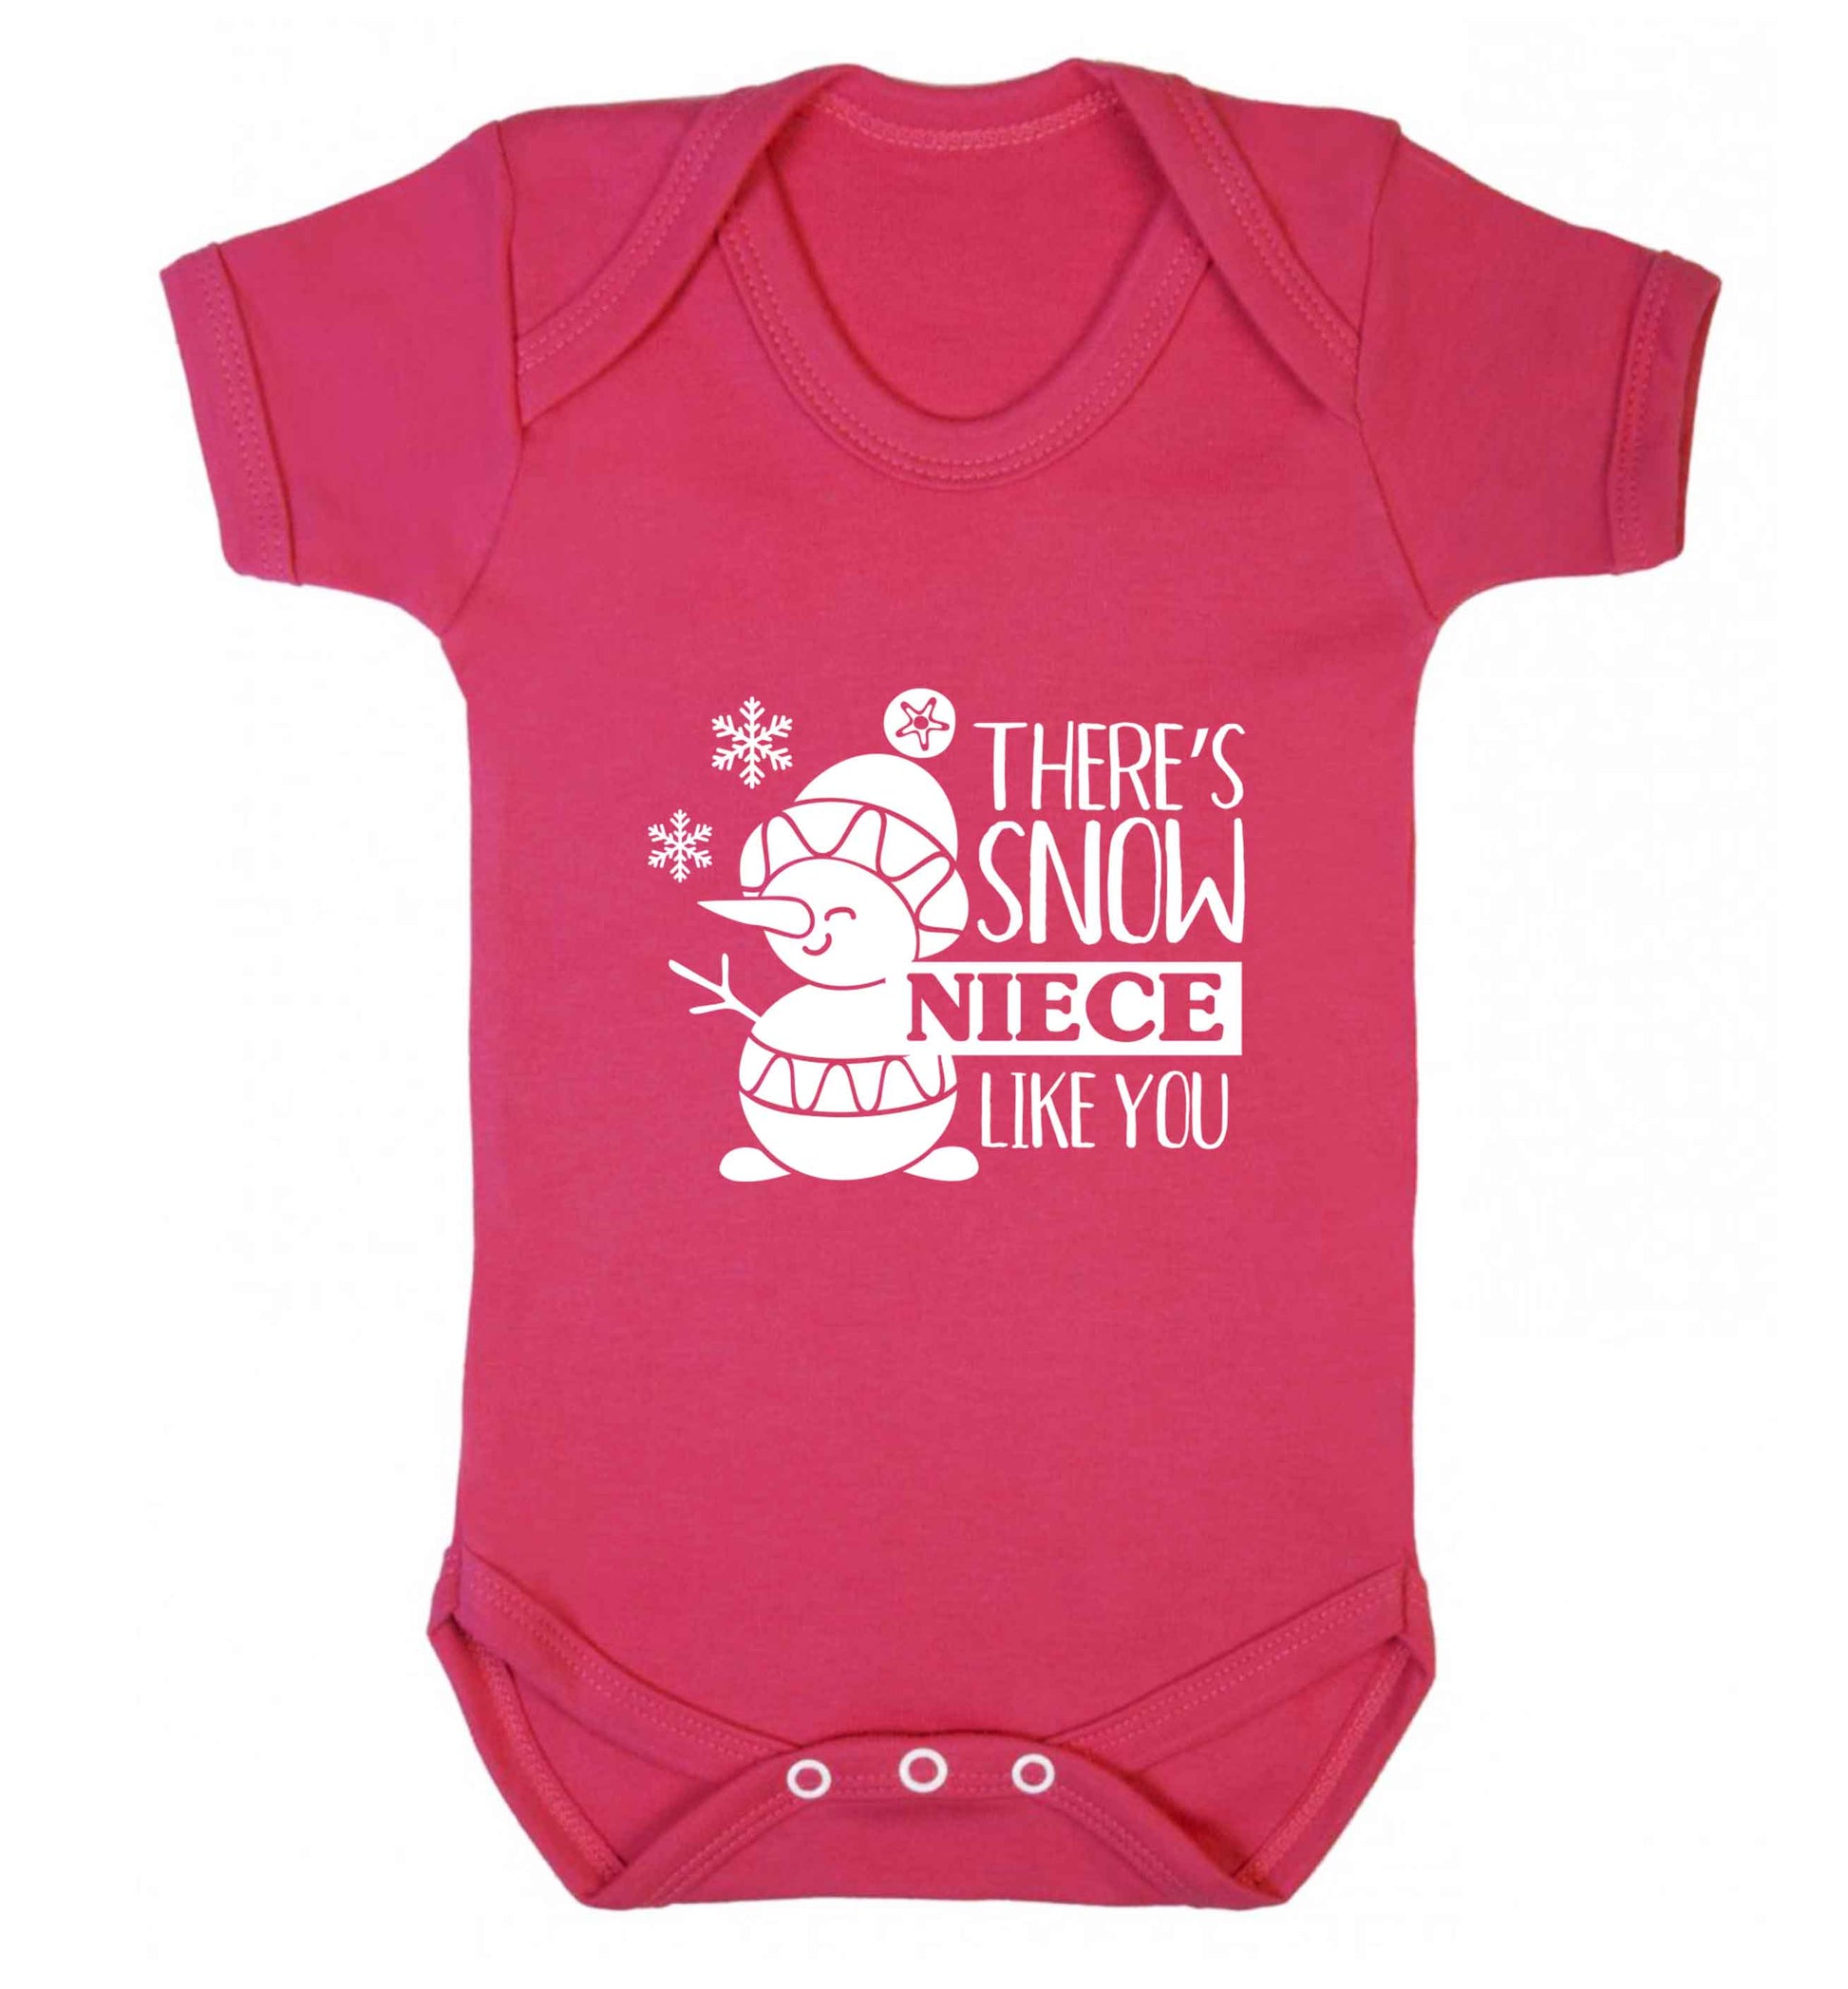 There's snow niece like you baby vest dark pink 18-24 months